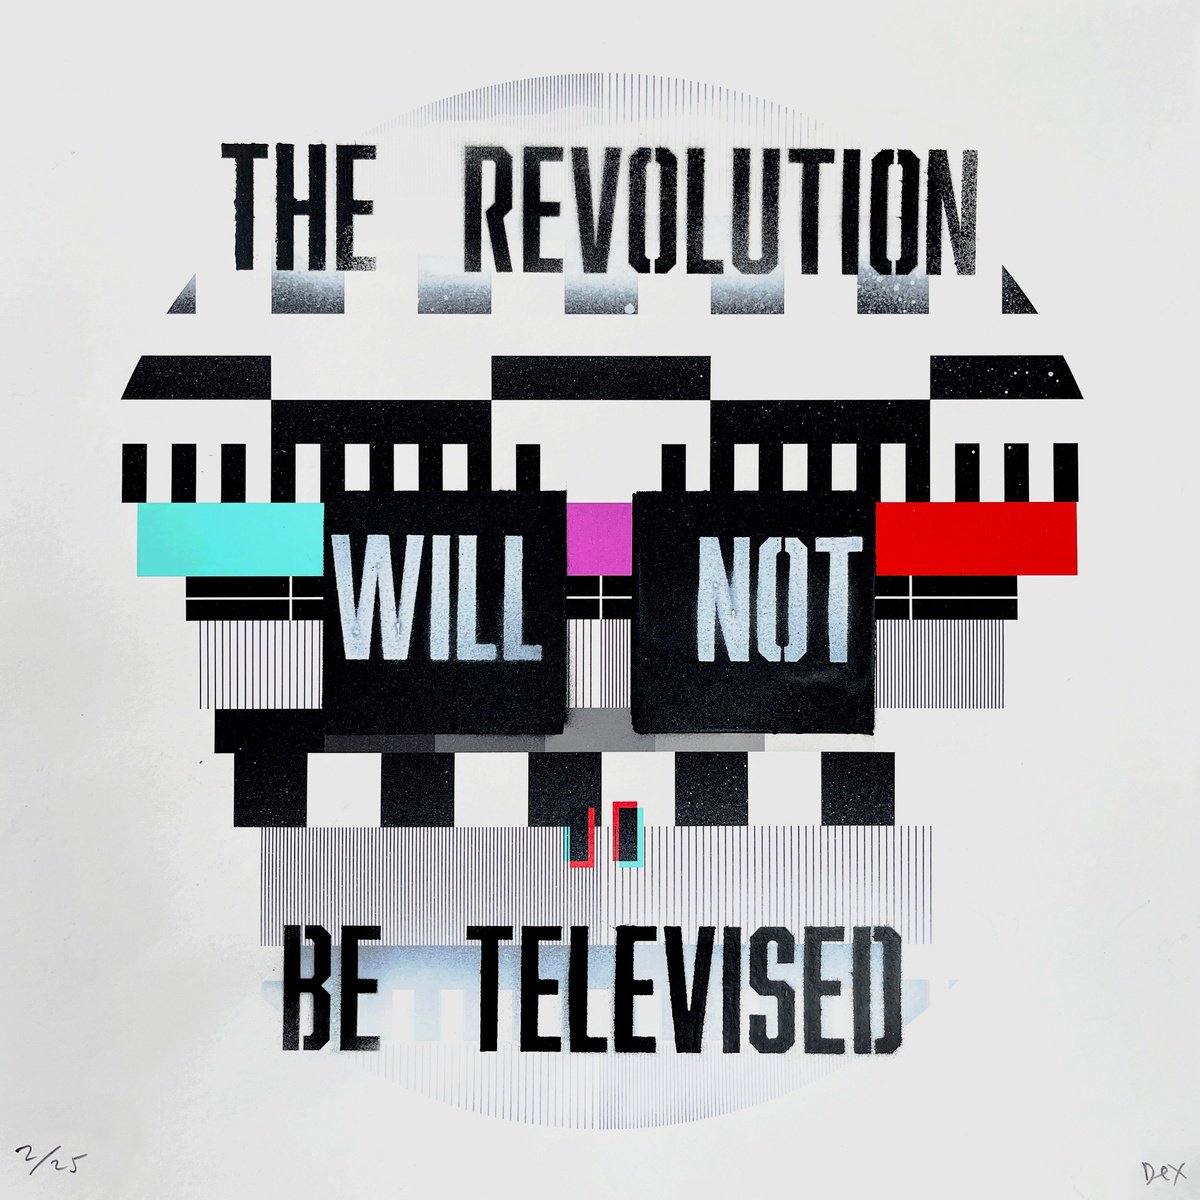 The Revolution Will Not Be Televised by Dex